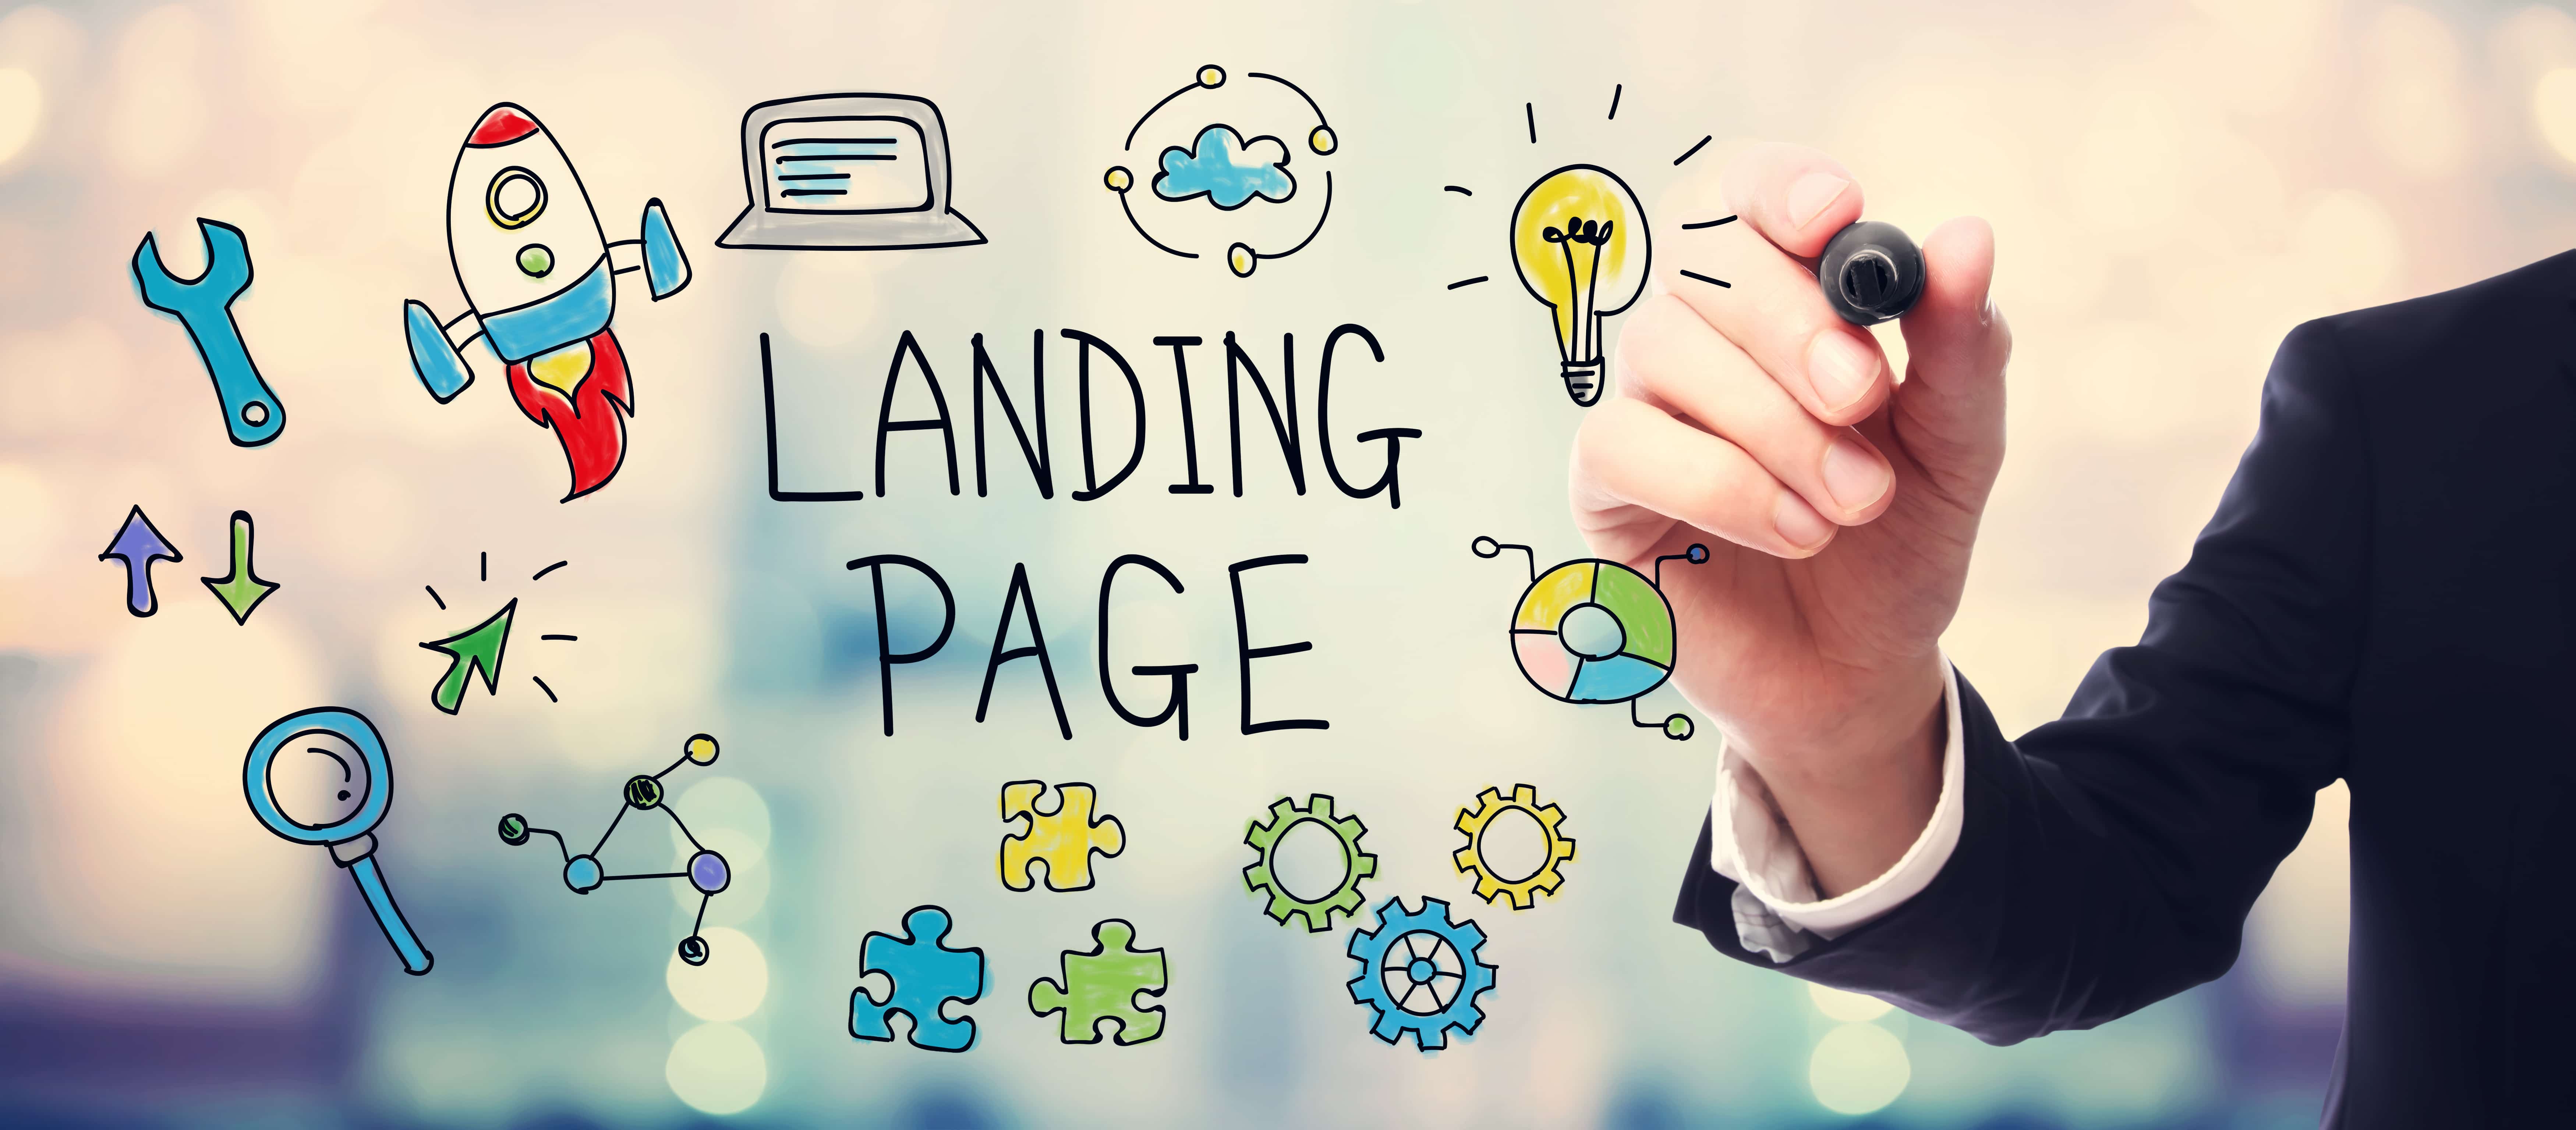 It’s maybe the best landing page builder for small business.